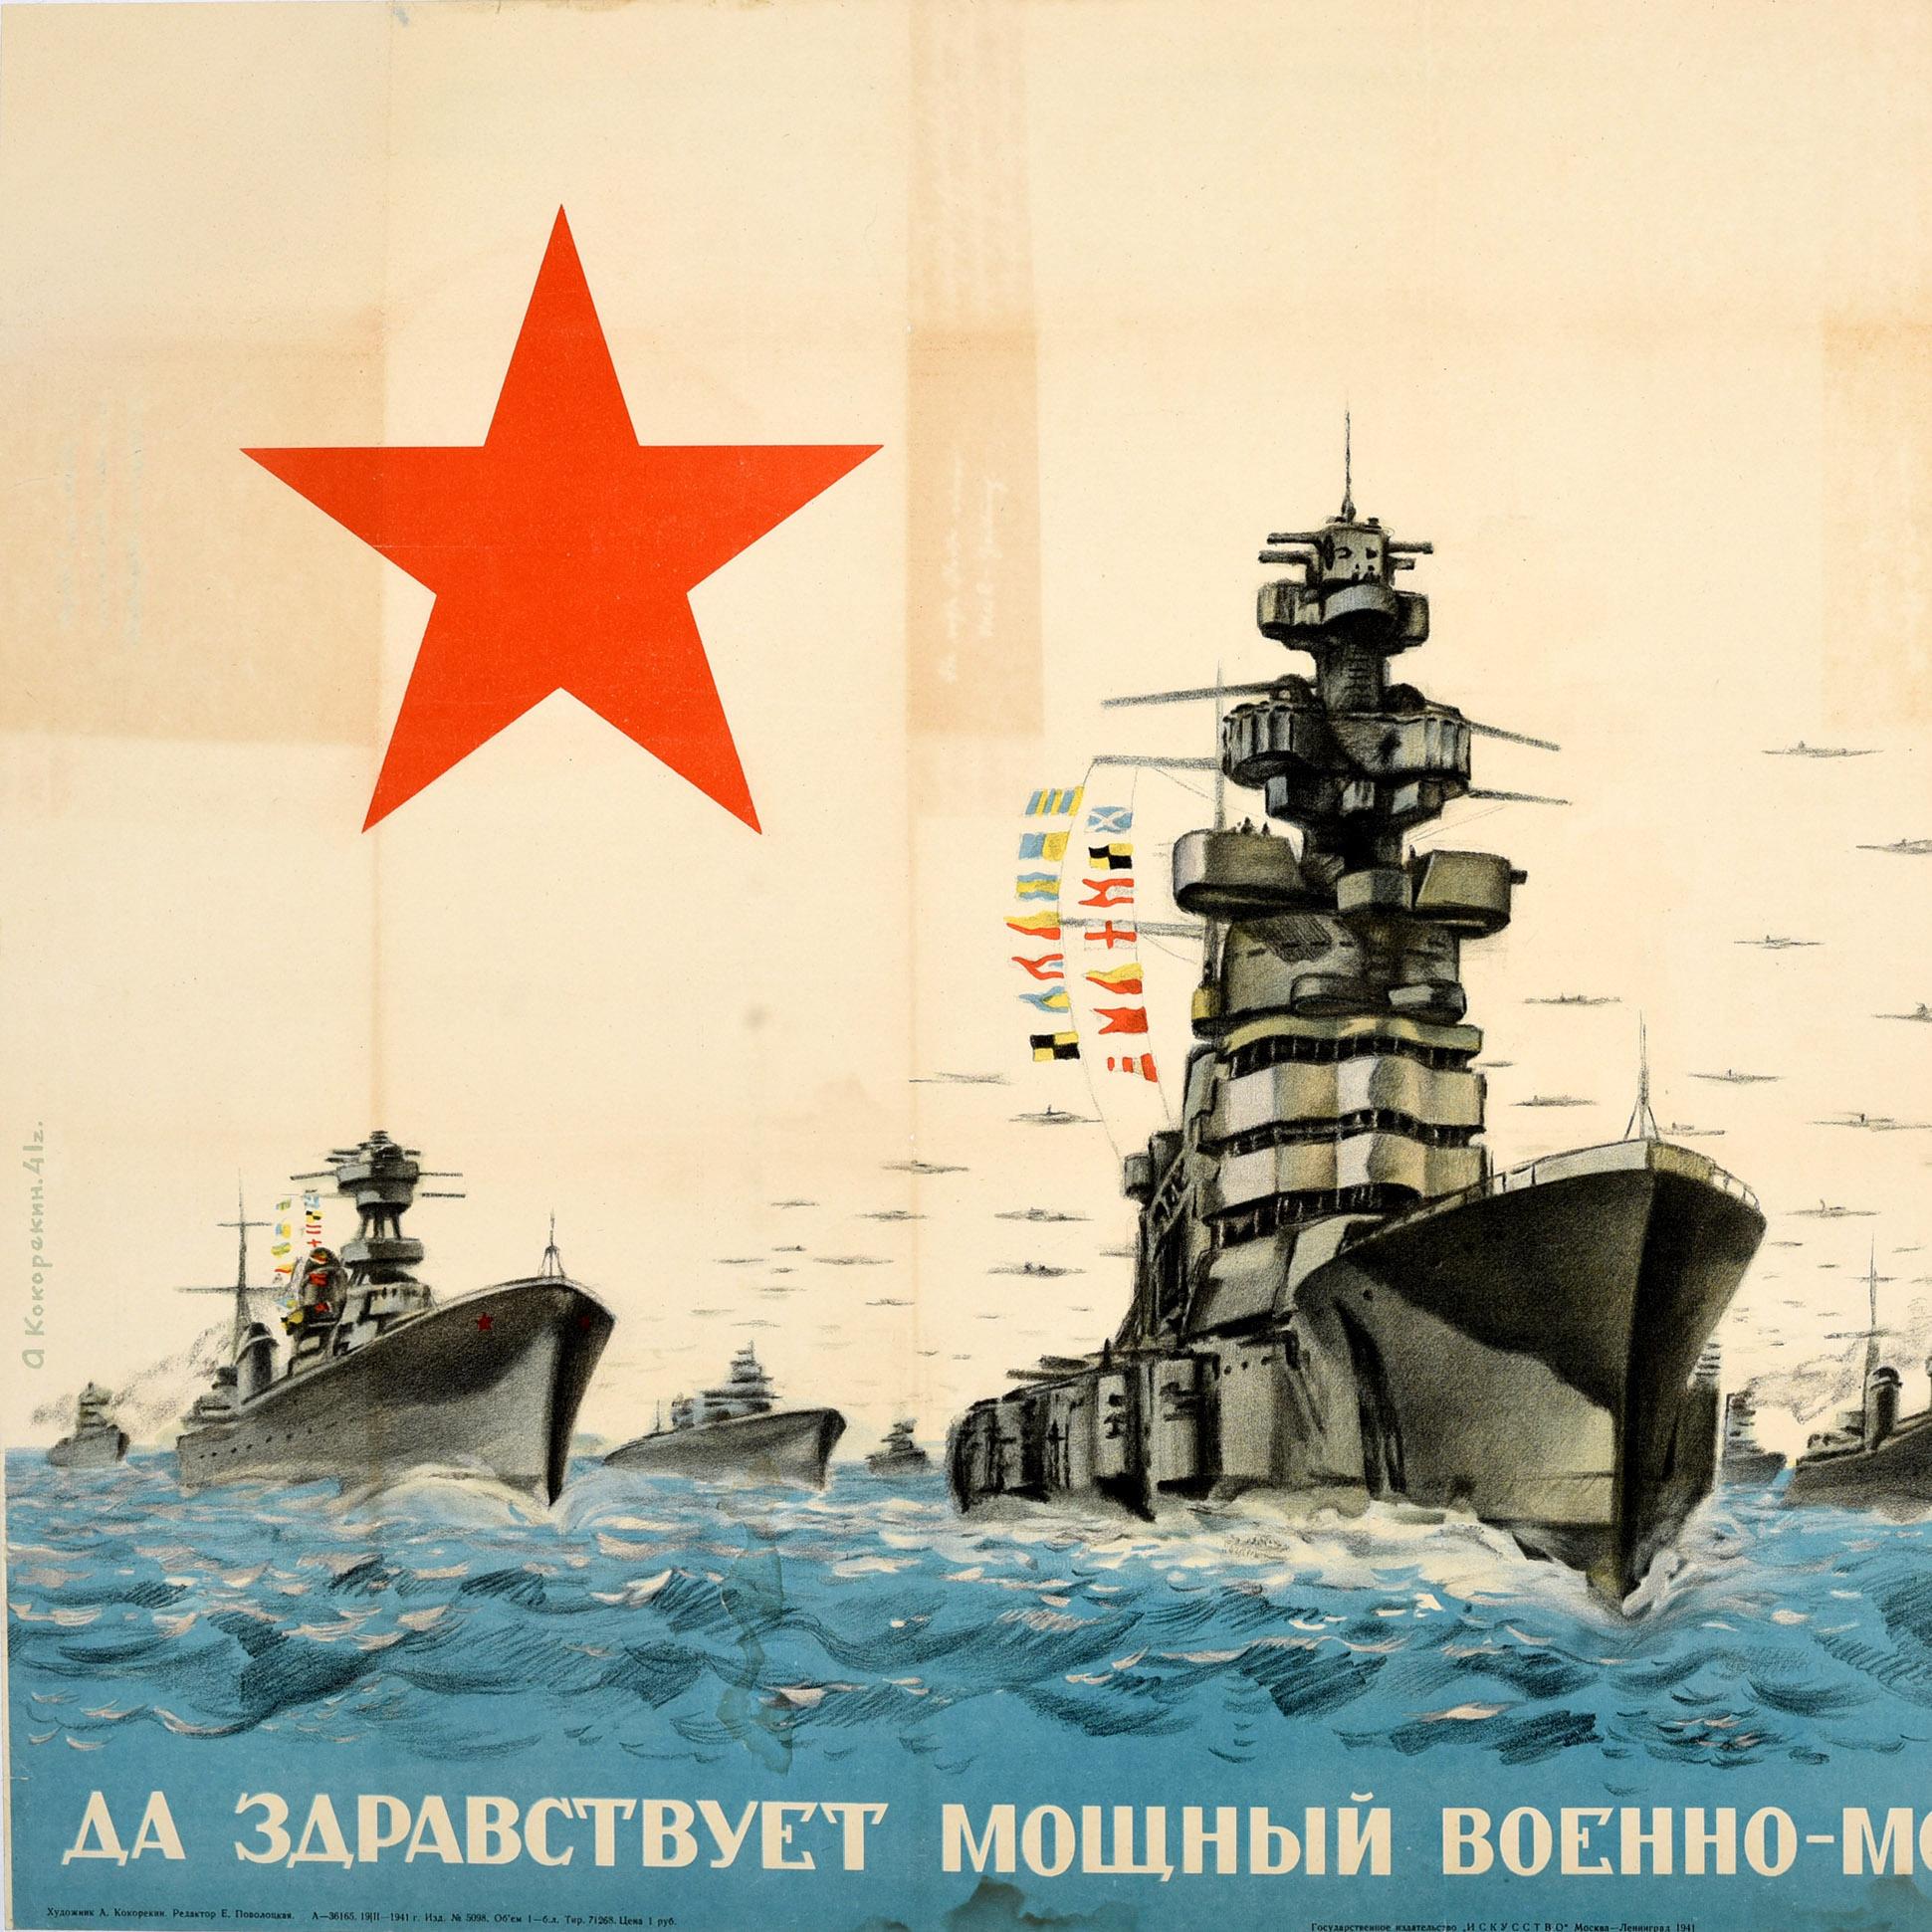 Original vintage Soviet World War Two propaganda poster - Long Live the Powerful Navy of the USSR / Да Здравствует Мощный Военно-морской Флот Ссср! - featuring a naval image of a fleet of warships at sea with military planes flying overhead, a red